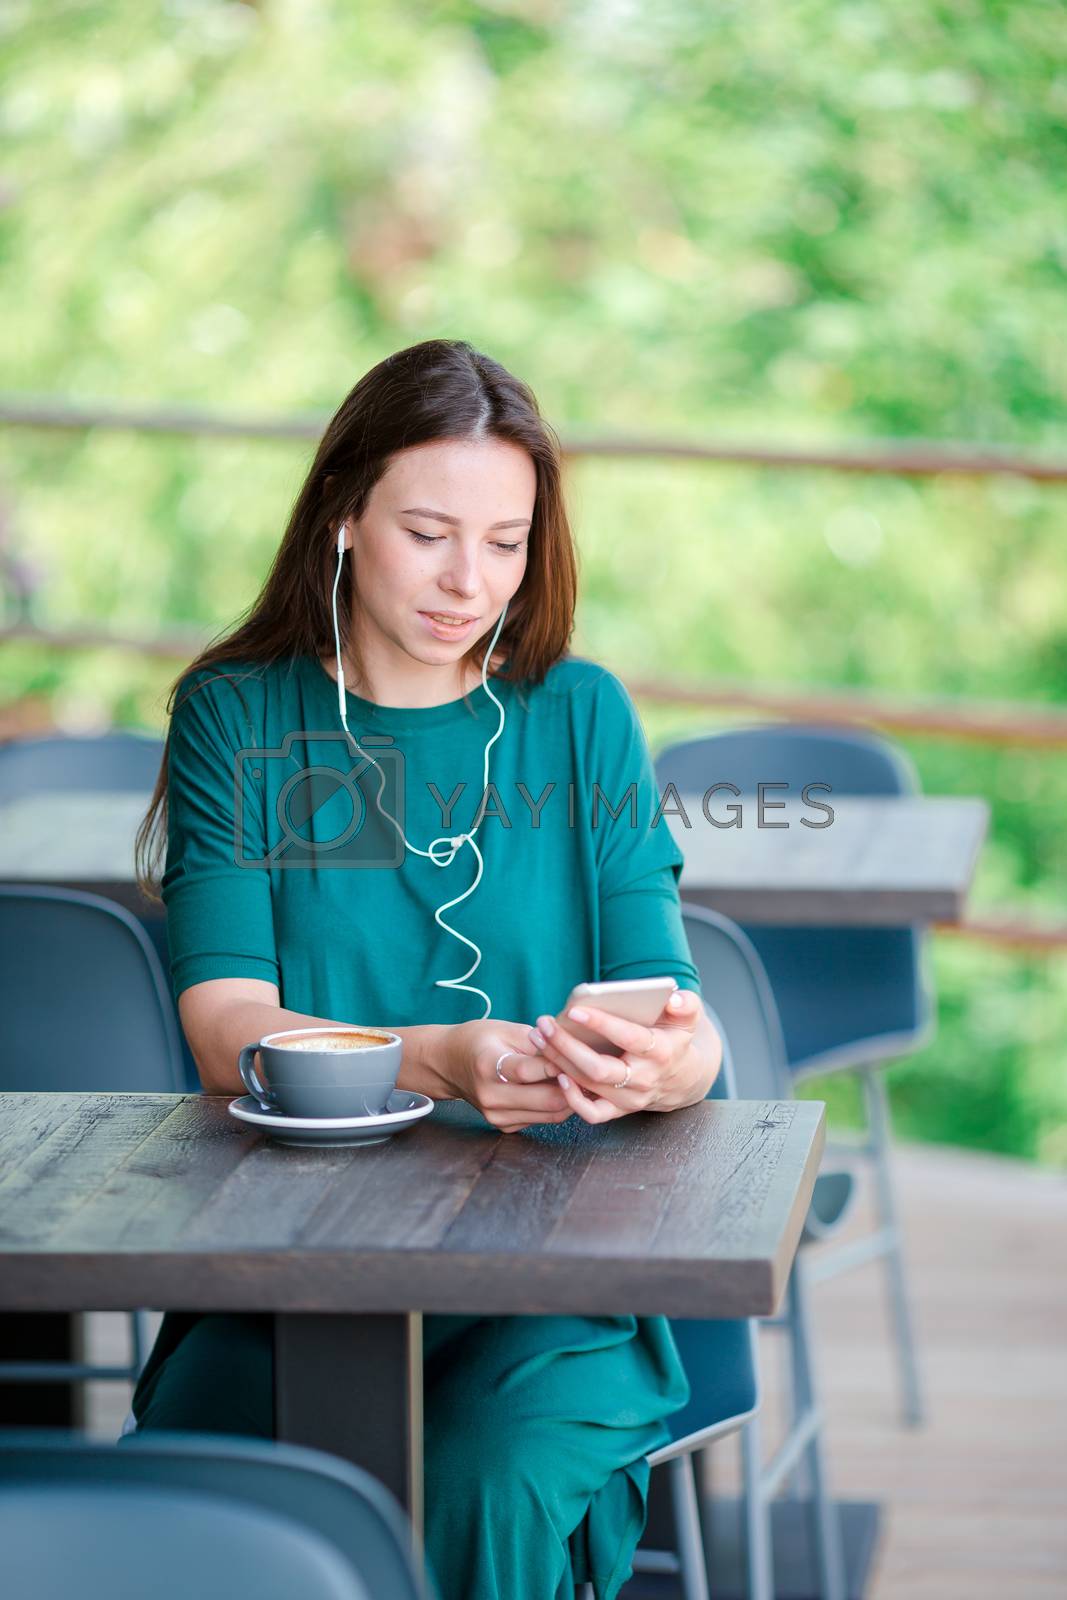 Royalty free image of Young woman with smart phone while sitting alone in coffee shop during free time by travnikovstudio